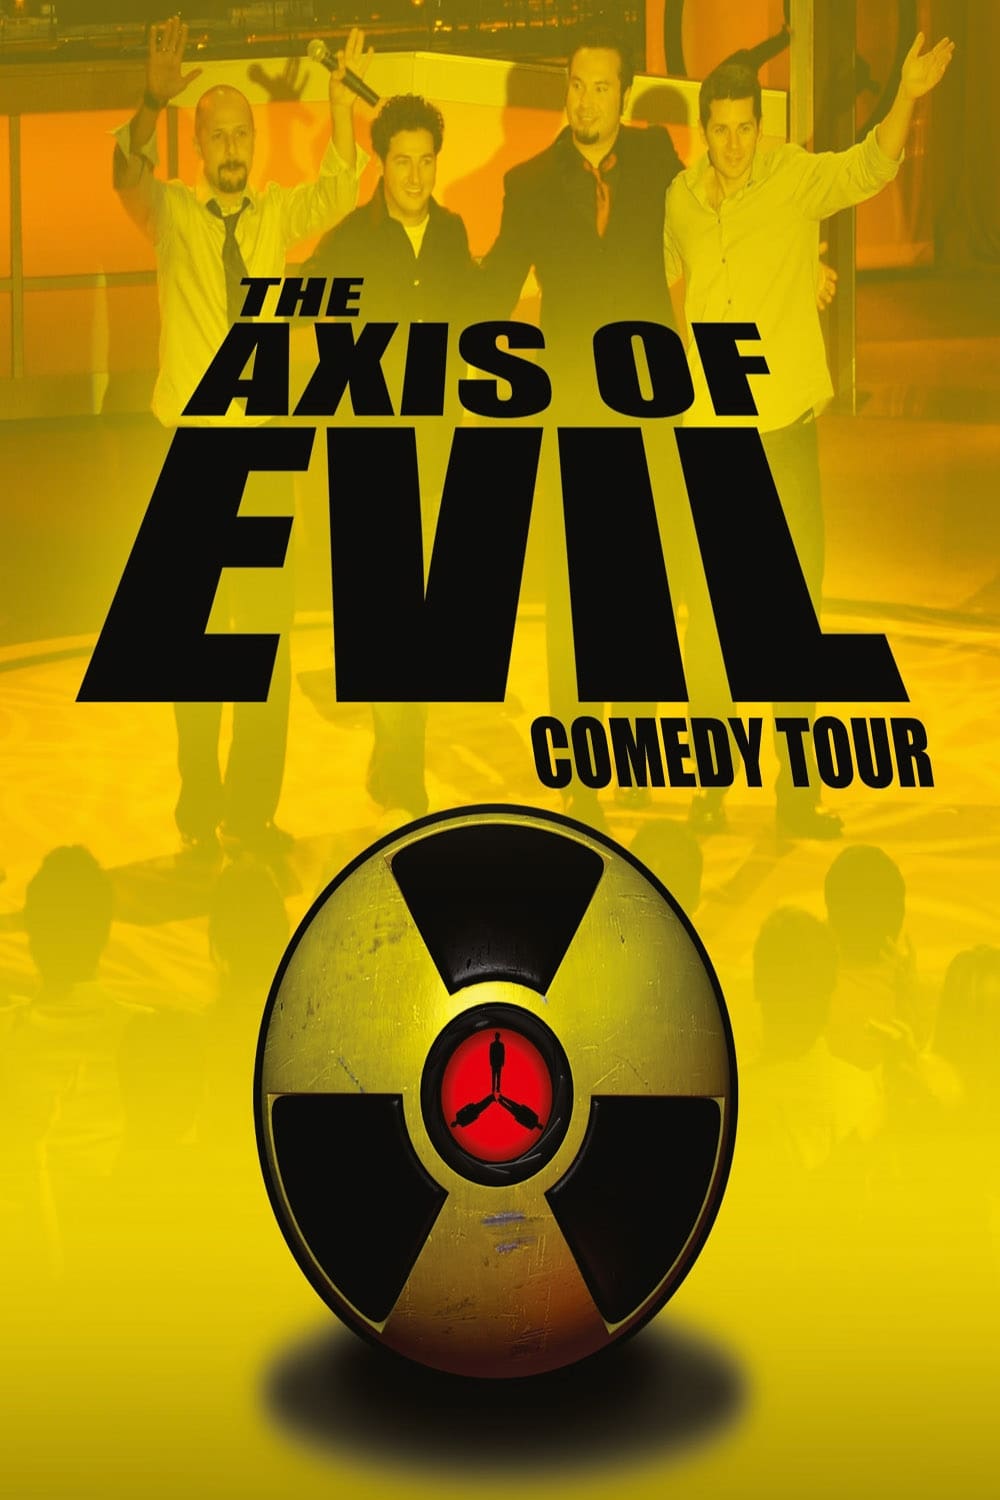 The Axis of Evil Comedy Tour film